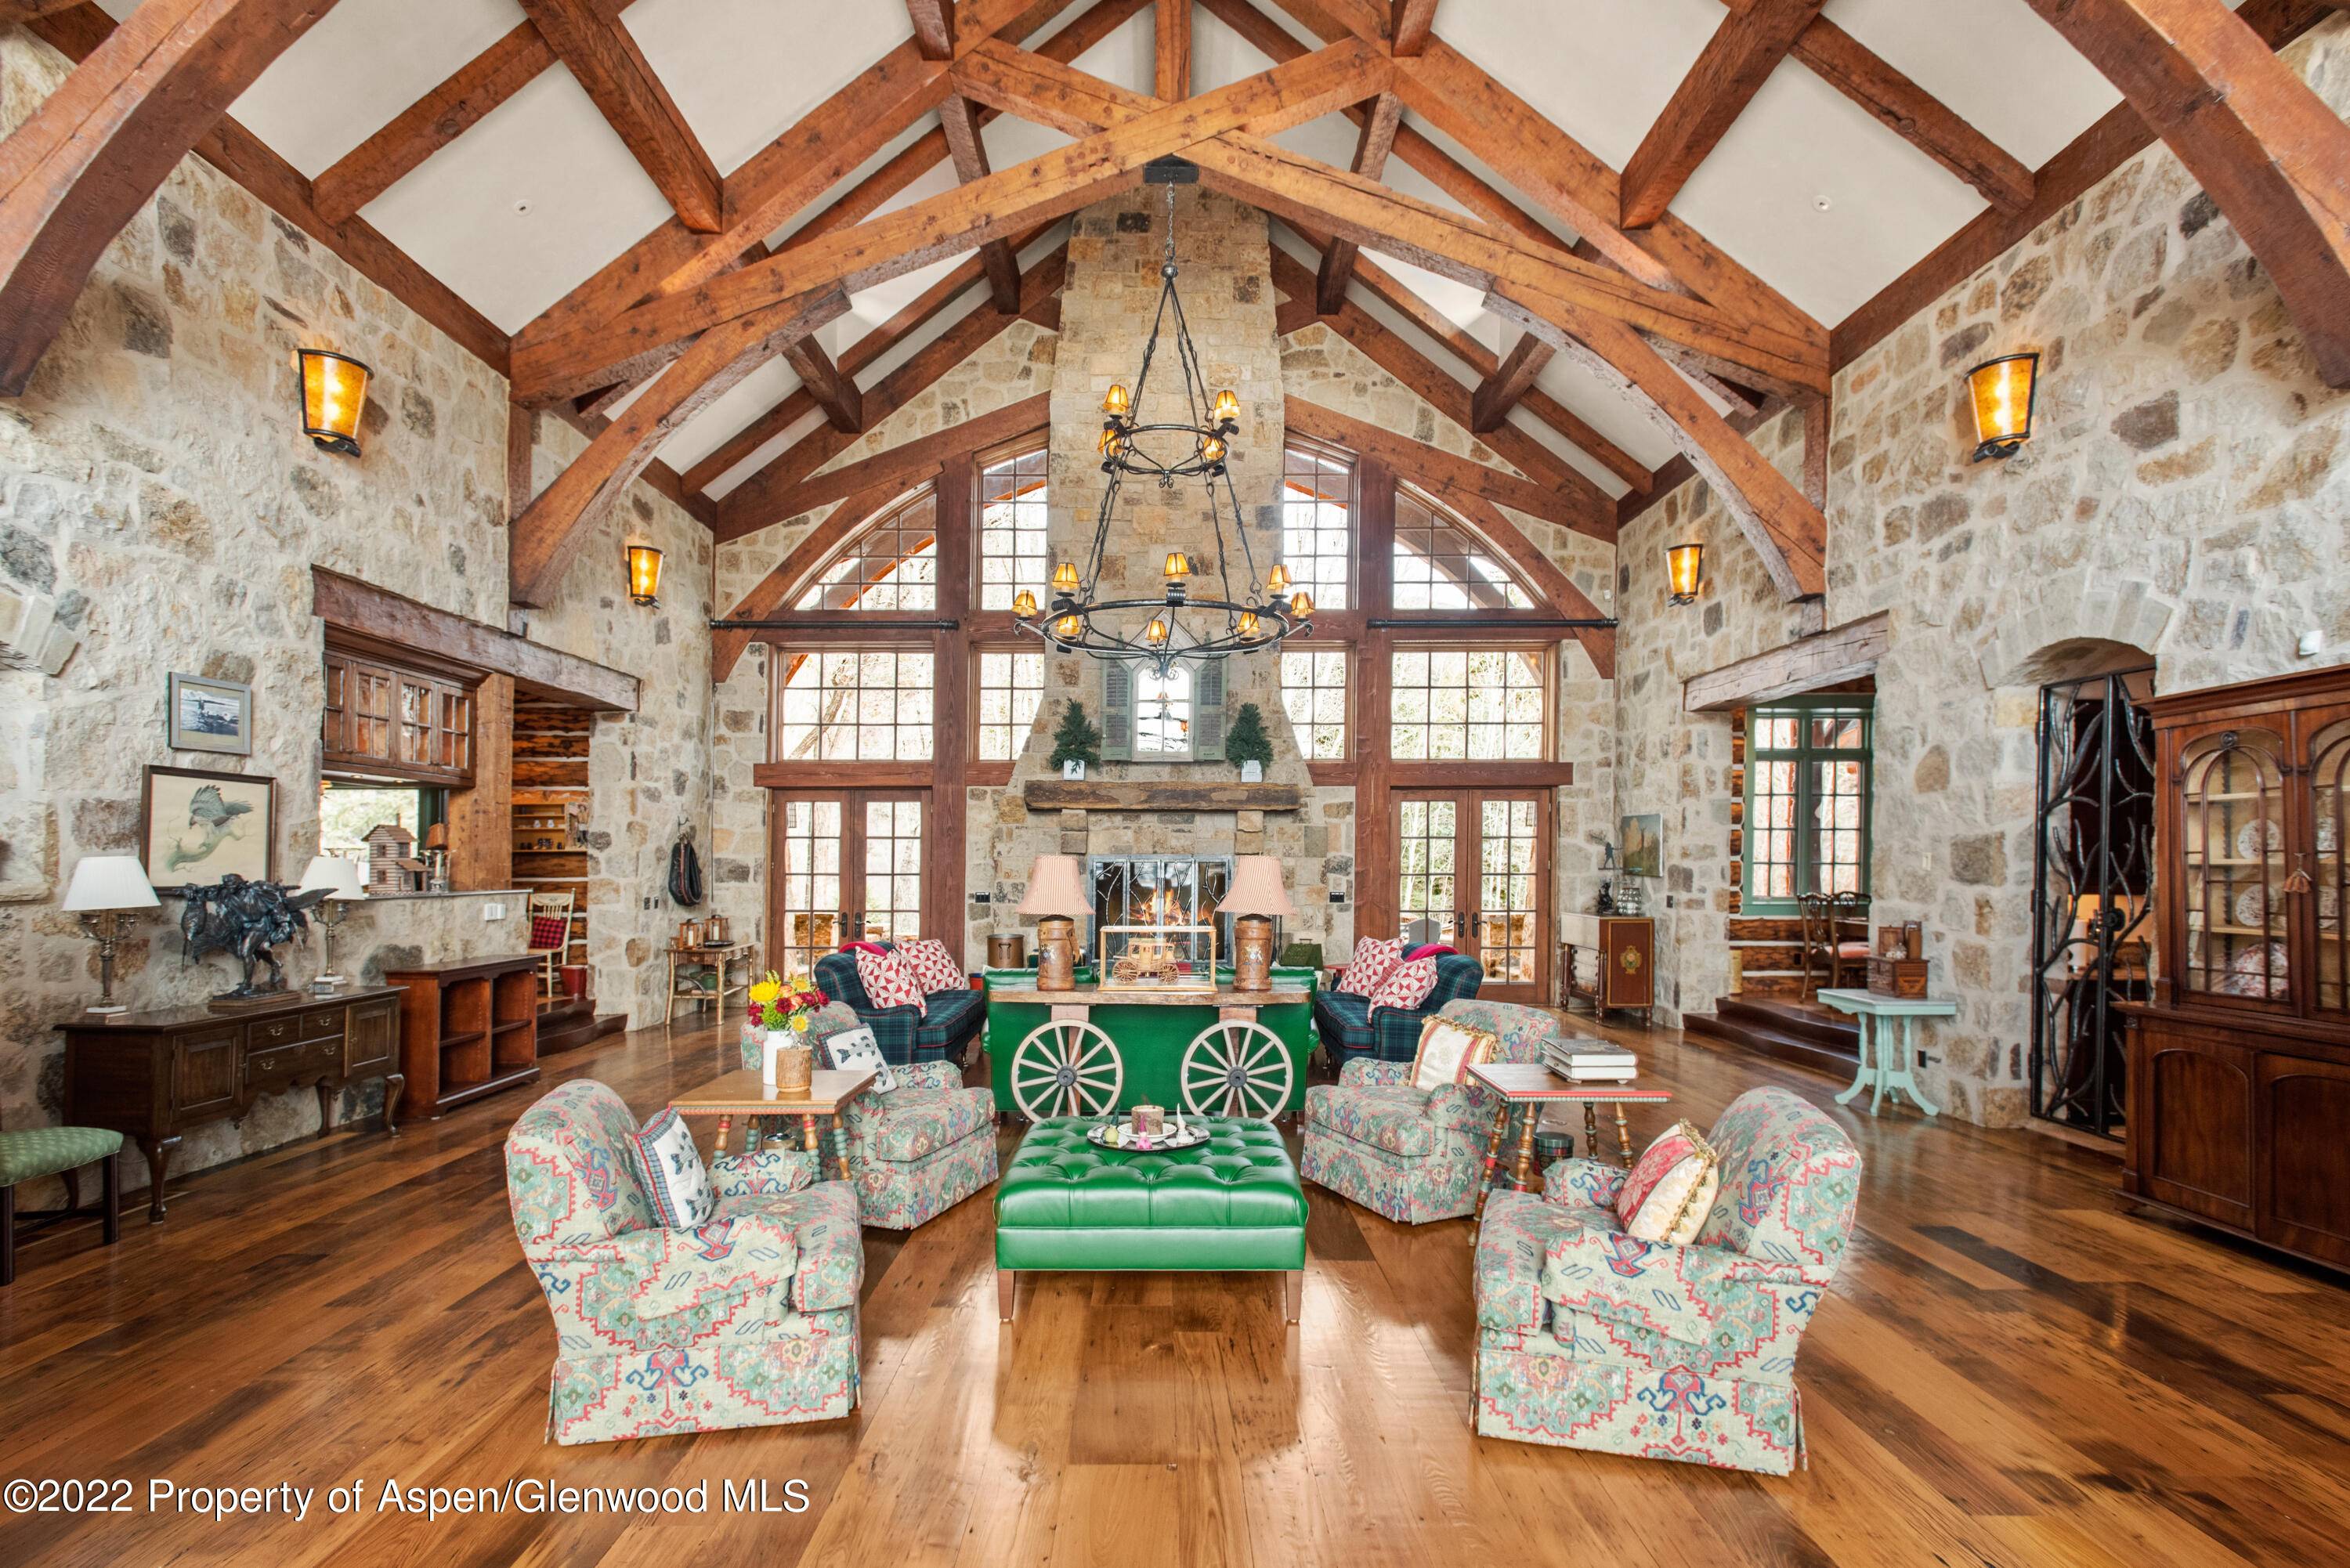 Situated along the pristine Snowmass Creek, enjoy this beautiful mountain lodge with finishes and furnishings that complement the mountain surroundings.